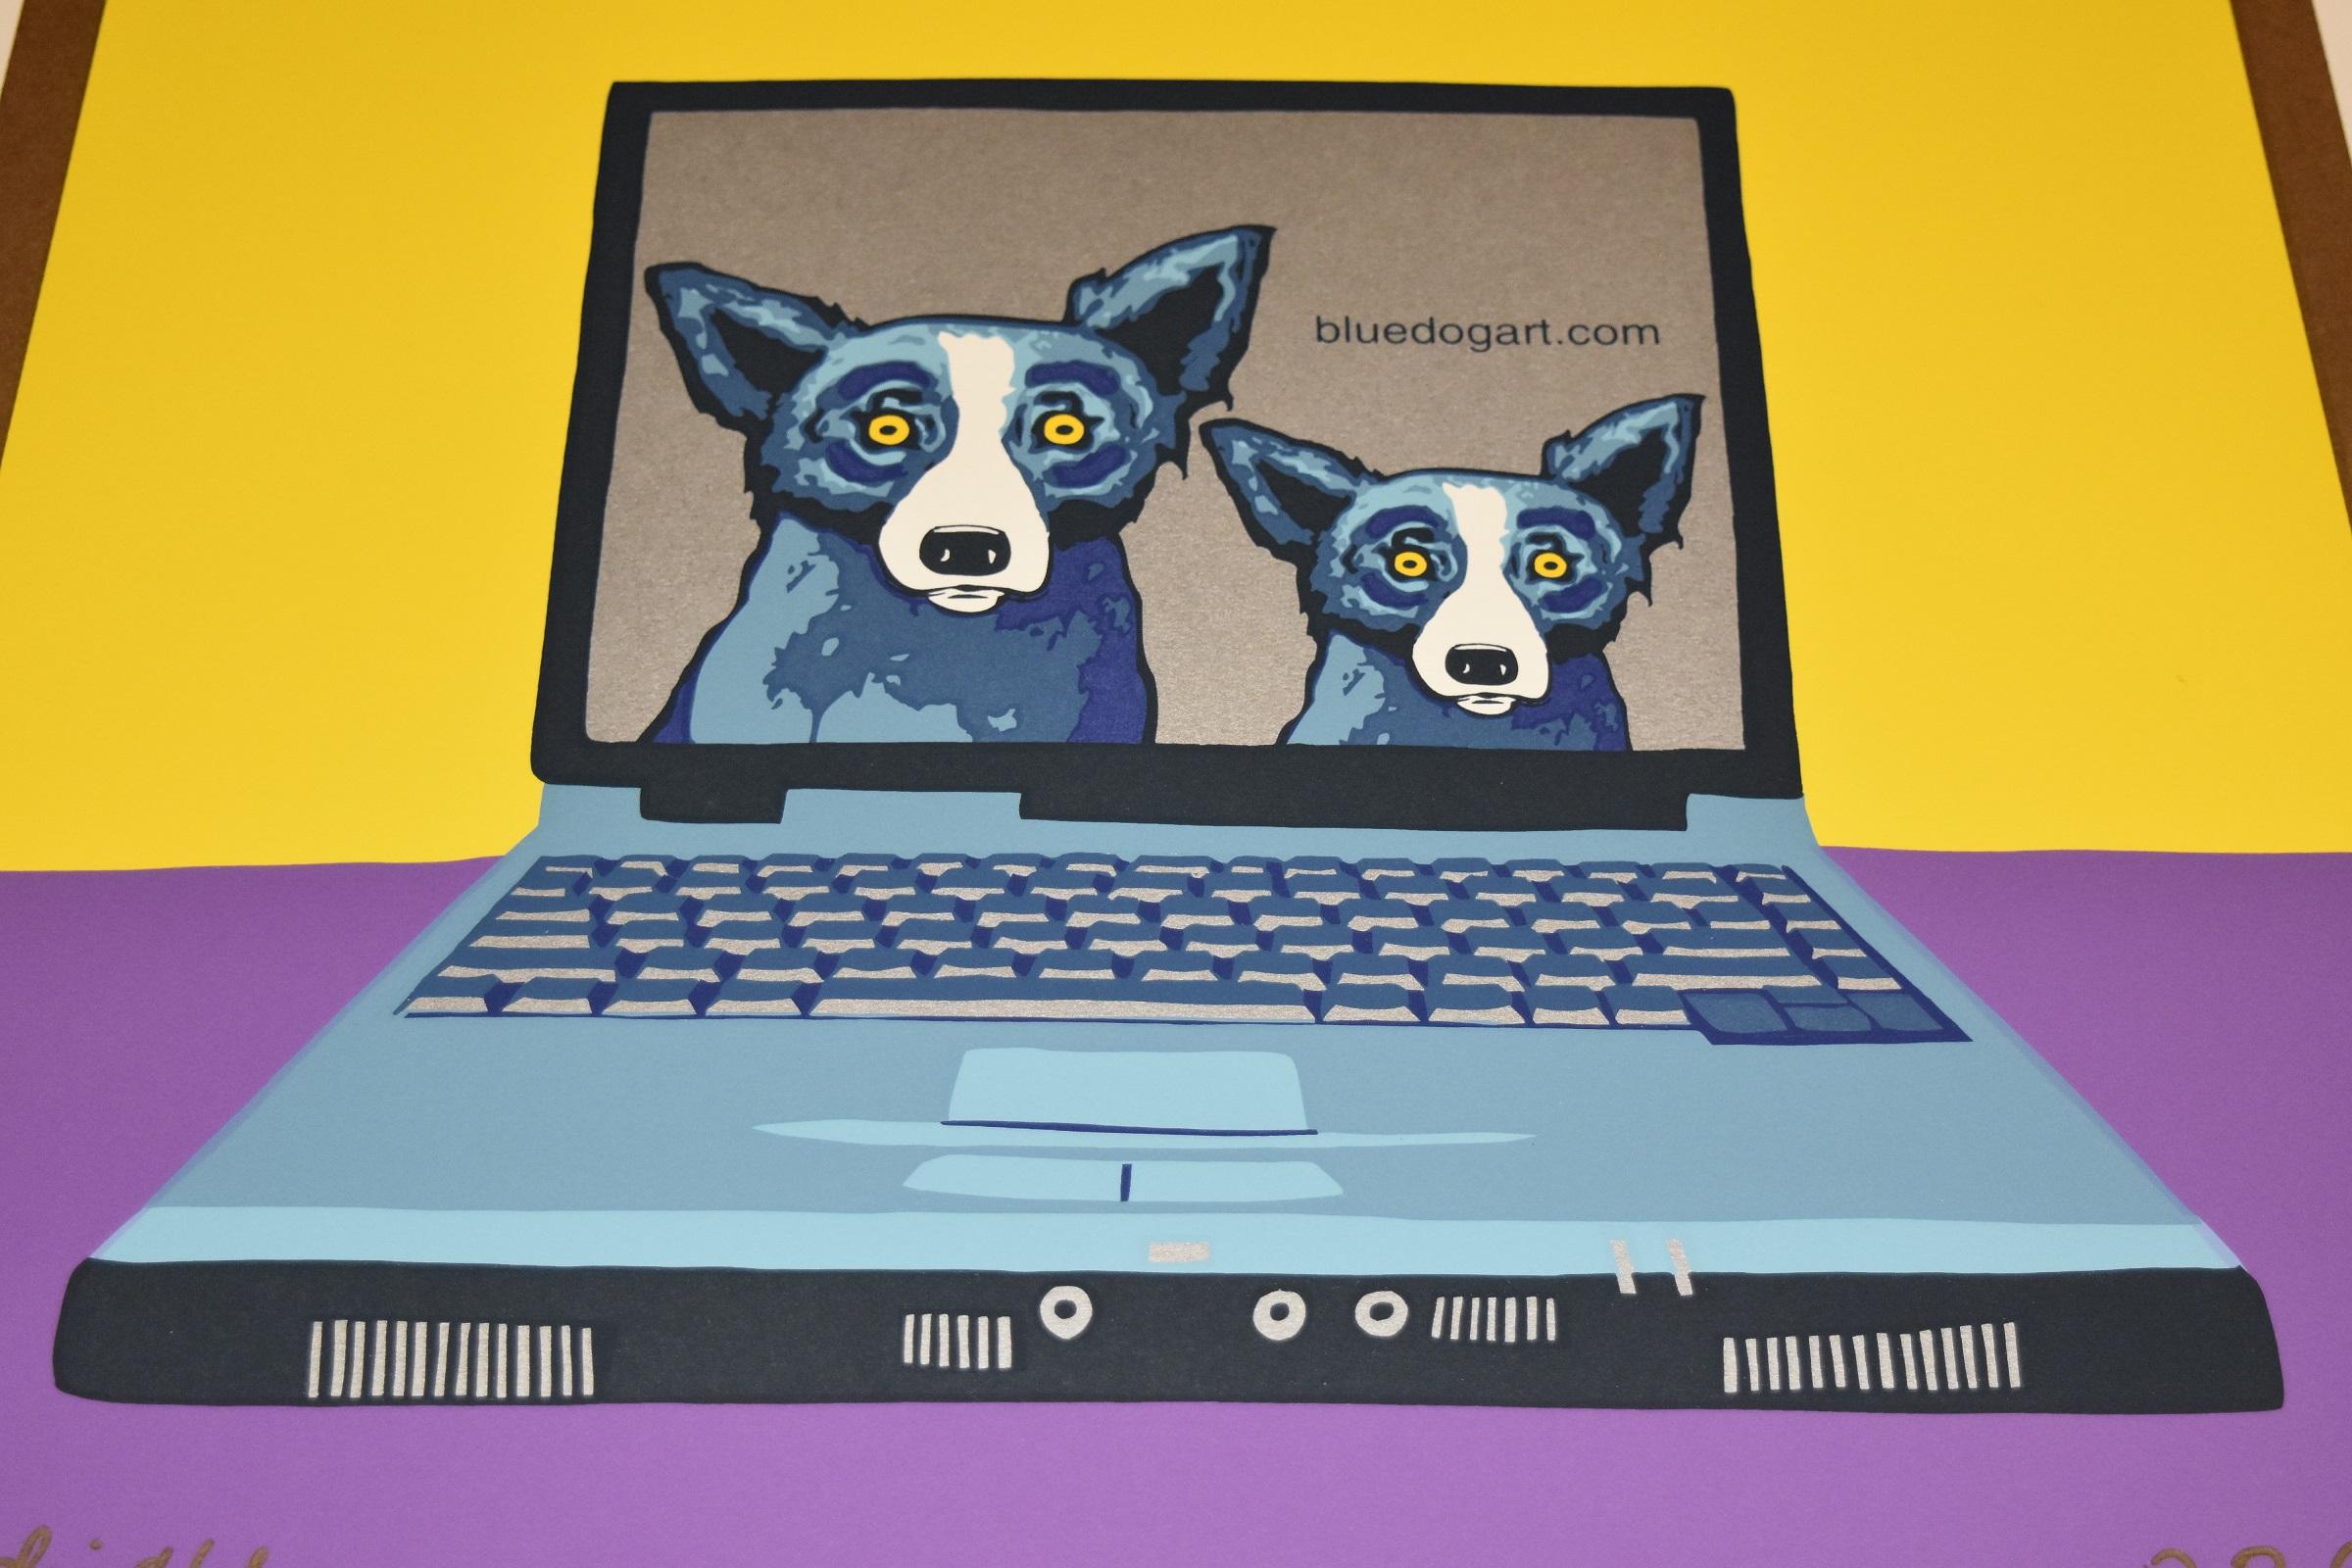 This Blue Dog work consists of a purple and yellow split background with a light blue open laptop and 2 dogs on the screen with the website name.  Both dogs have soulful yellow eyes.  This pop art animal original silkscreen print on paper is